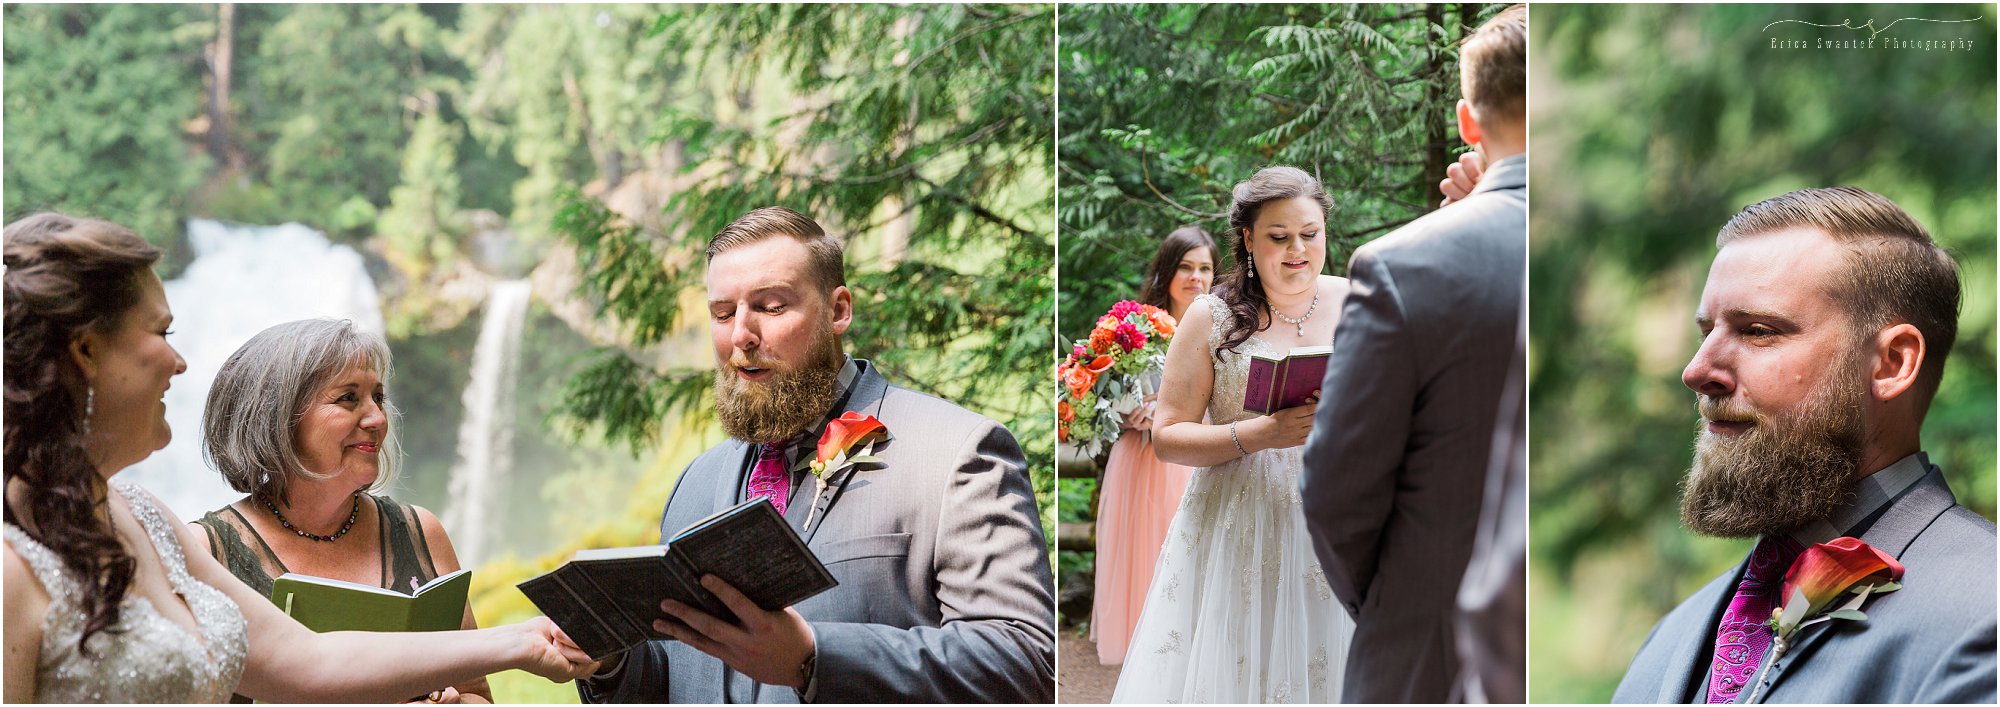 A couple reads their handwritten vows to each other at their intimate ceremony by Sahalie Falls in Oregon. | Erica Swantek Photography